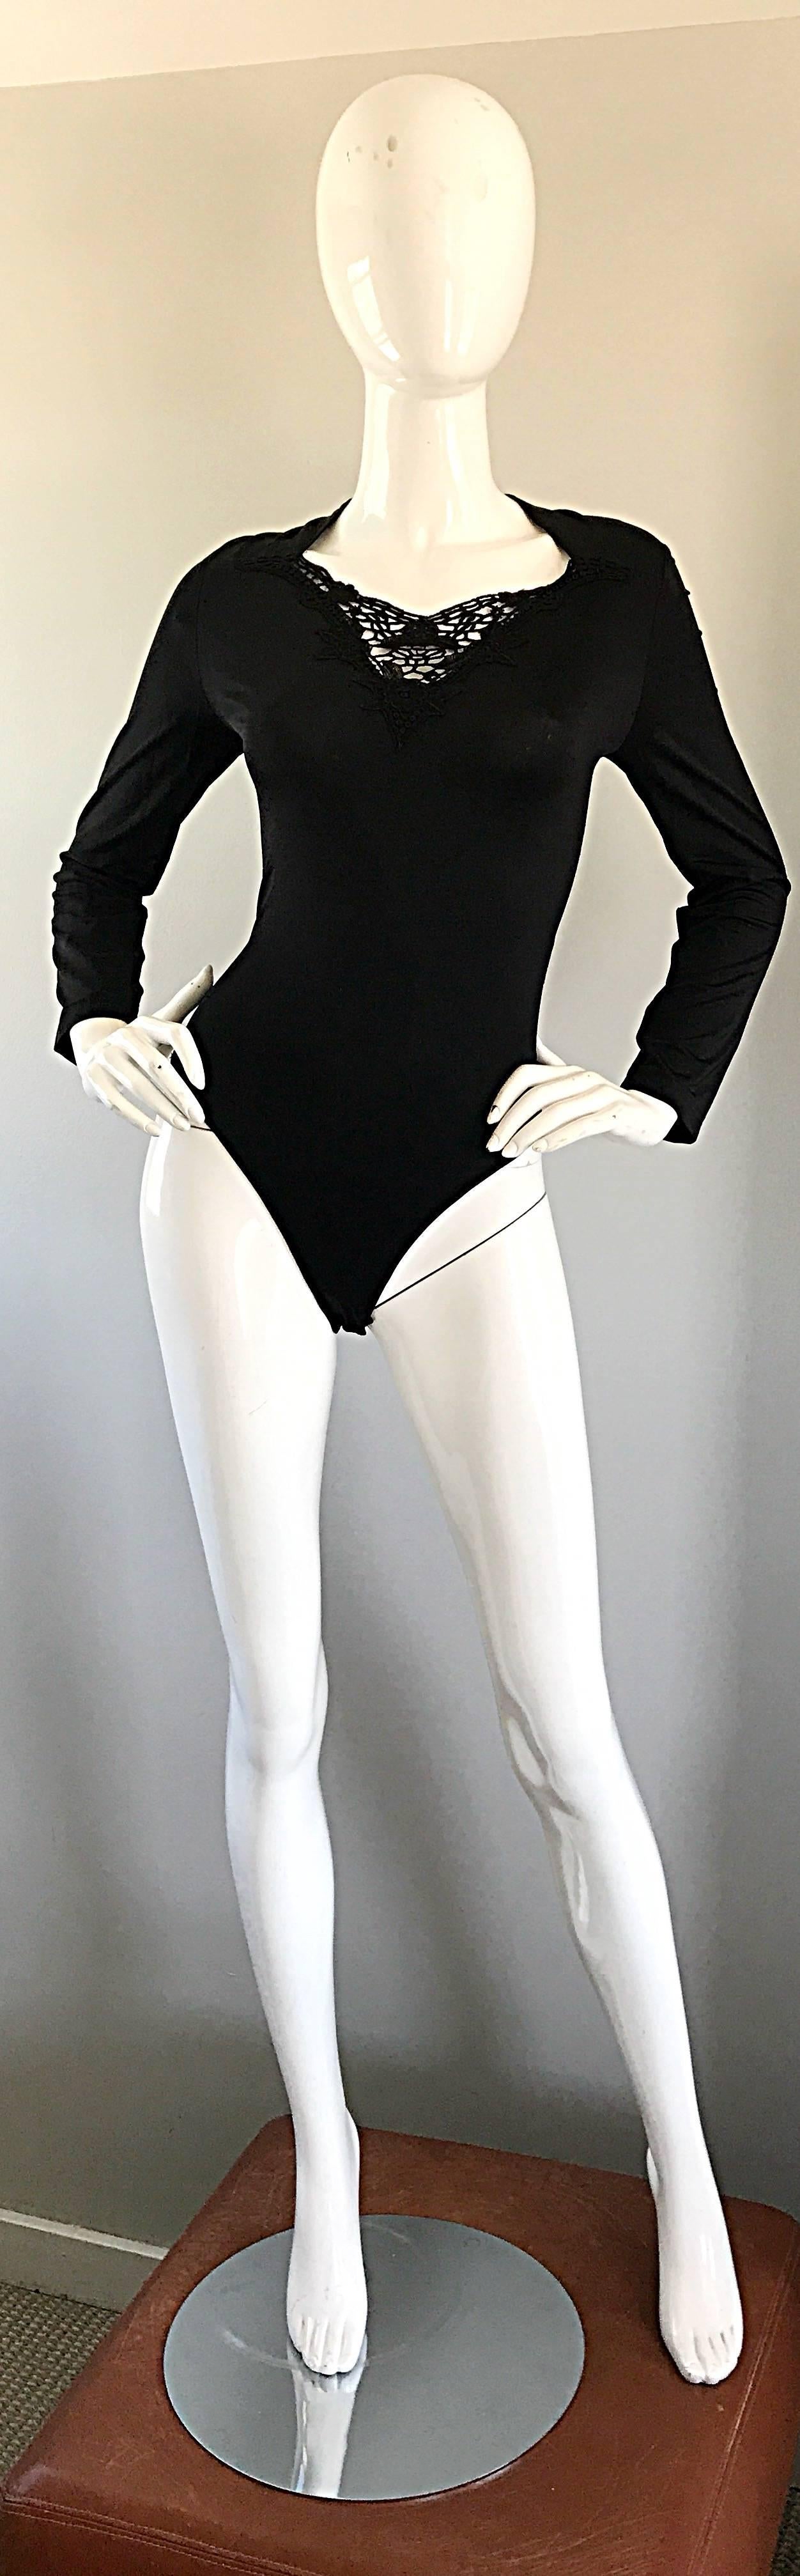 Sexy 90s ESCADA by MARGARETHA LEY black long sleeve bodysuit! Features a cut-out crochet design with sequins above the bust that resembles a butterfly. Soft rayon and elastic material stretches to fit (85%Rayon 15% Elastane. Adjustable snaps below